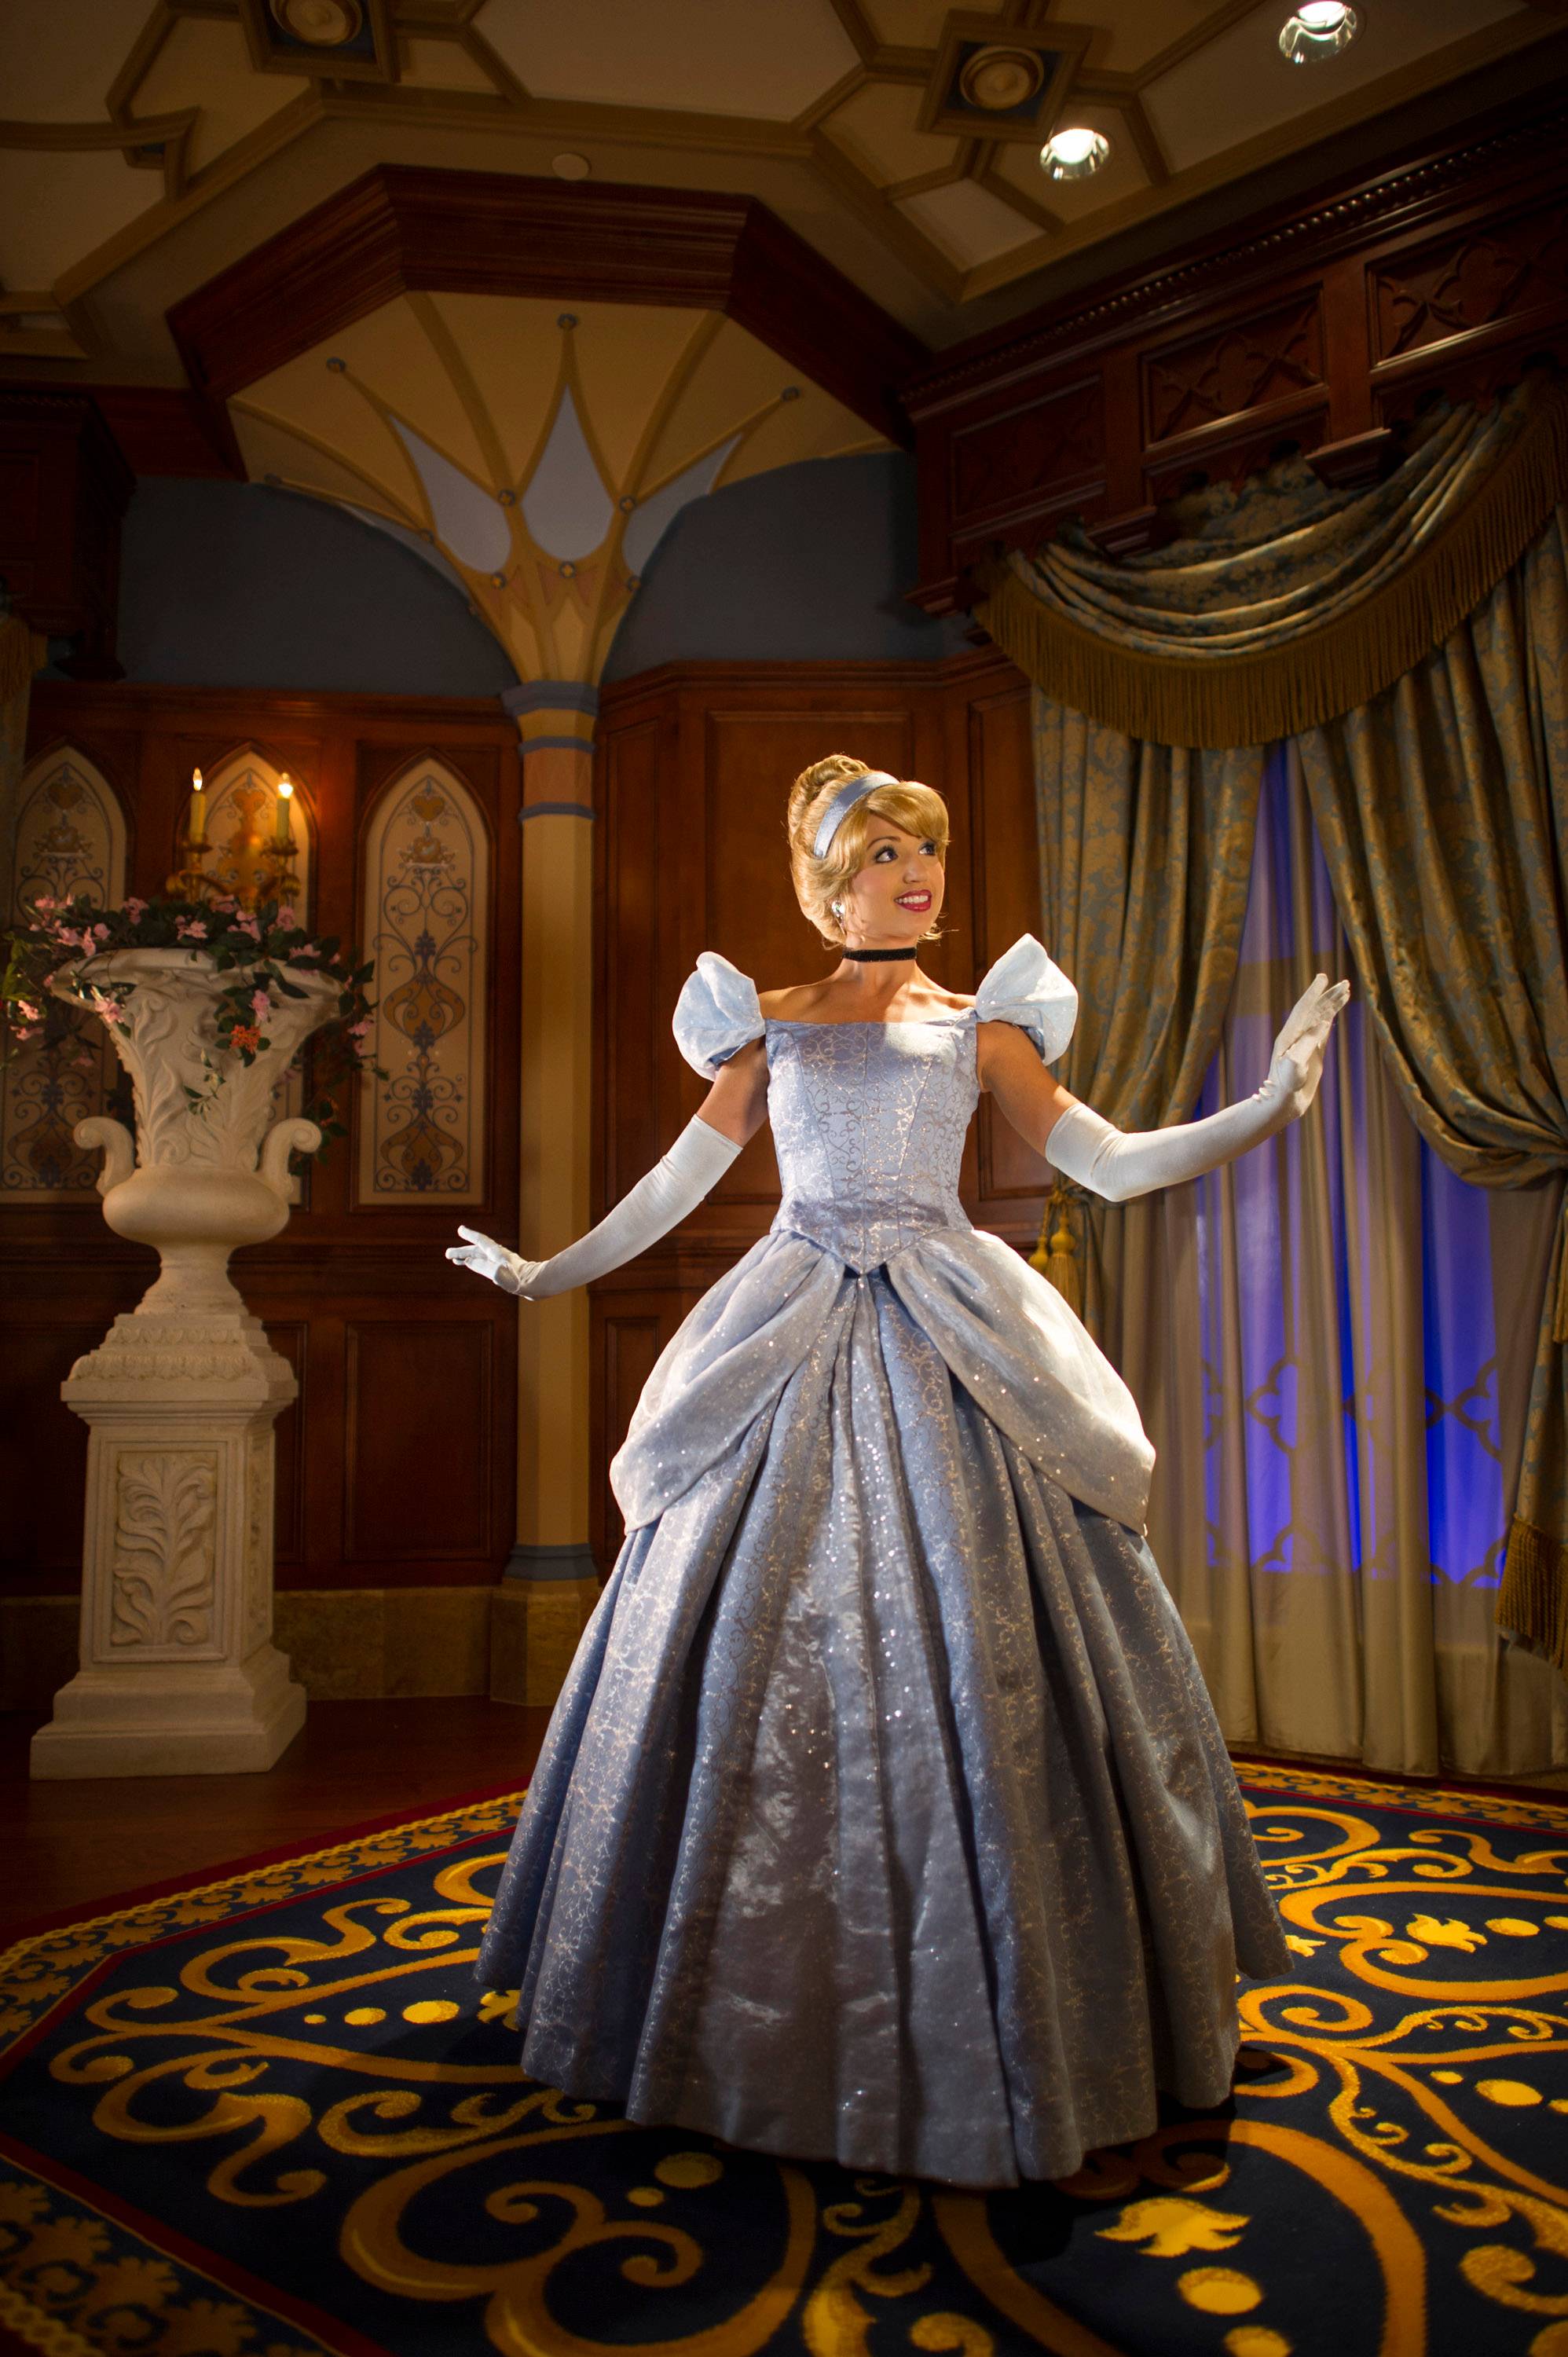 Frozen's Anna and Elsa meet and greet times to be extended at Princess Fairytale Hall